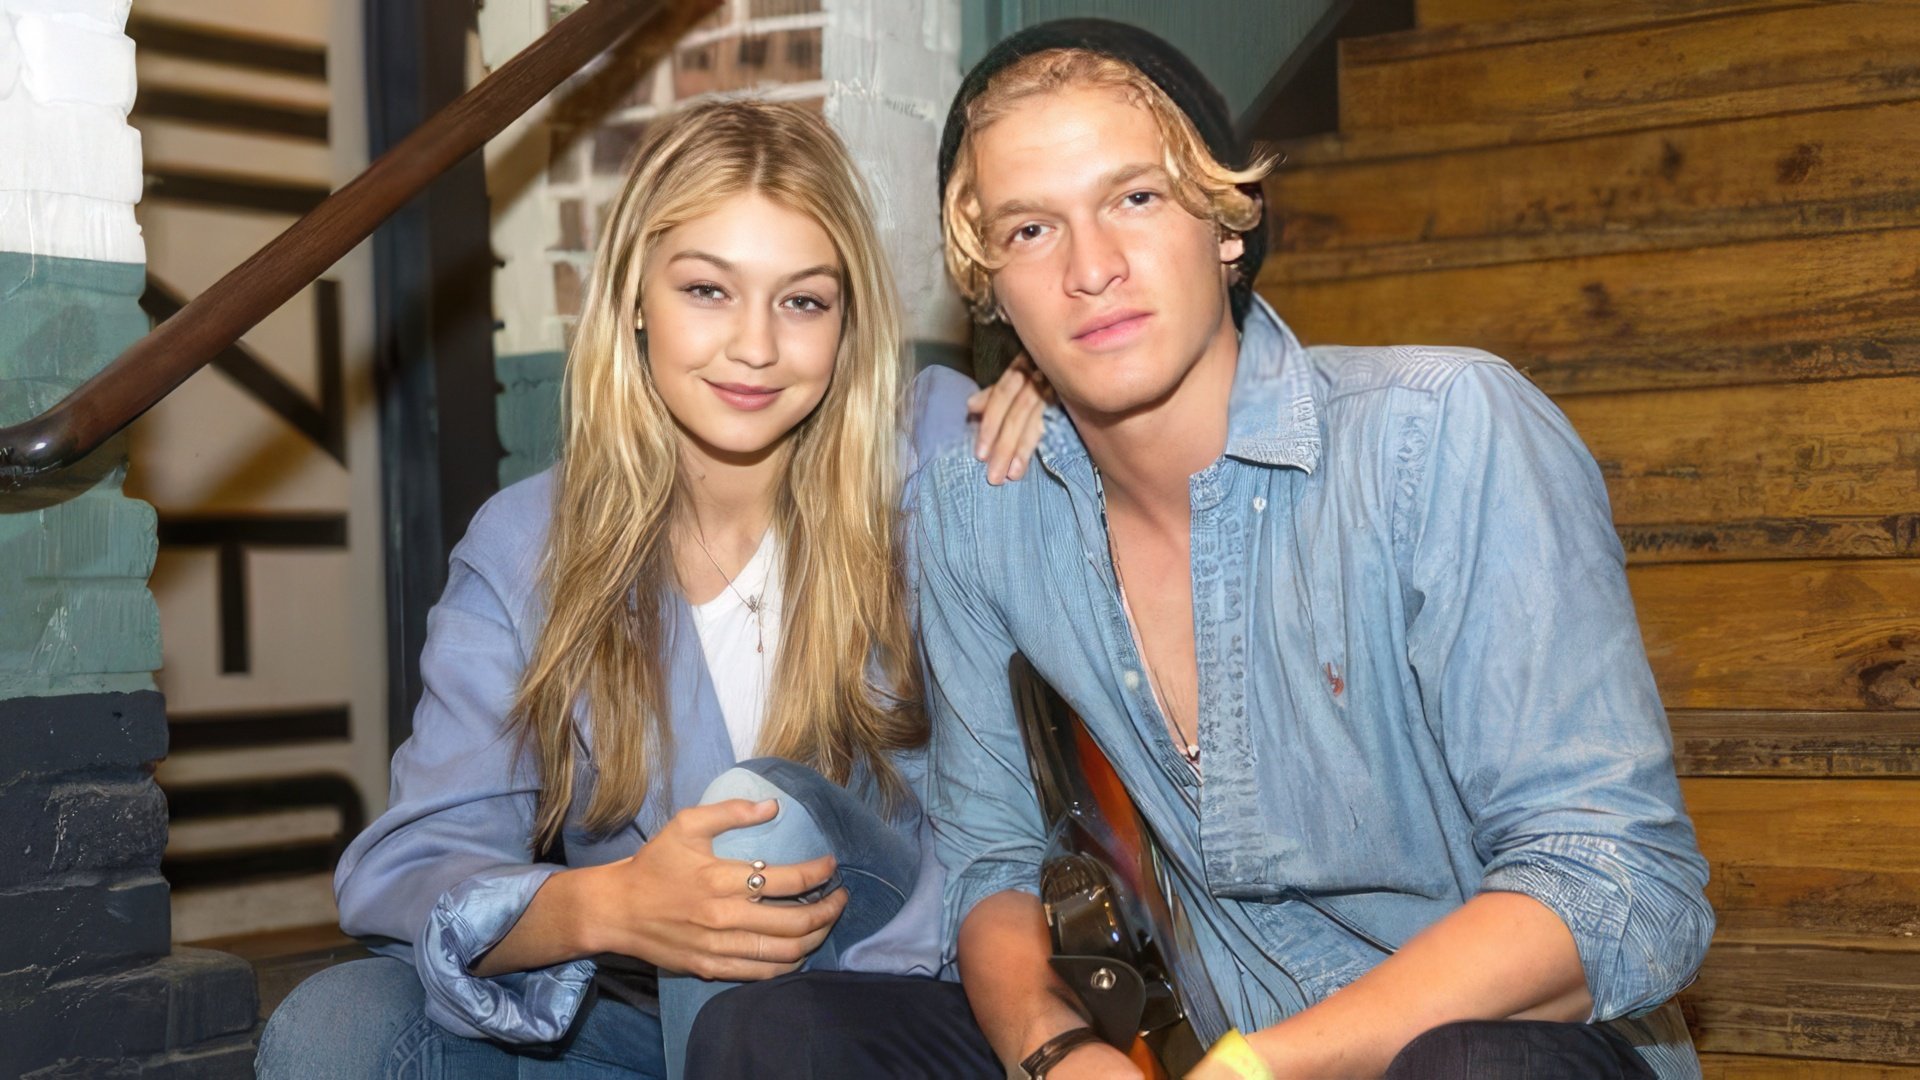 Gigi Hadid and Cody Simpson dated for 1.5 years